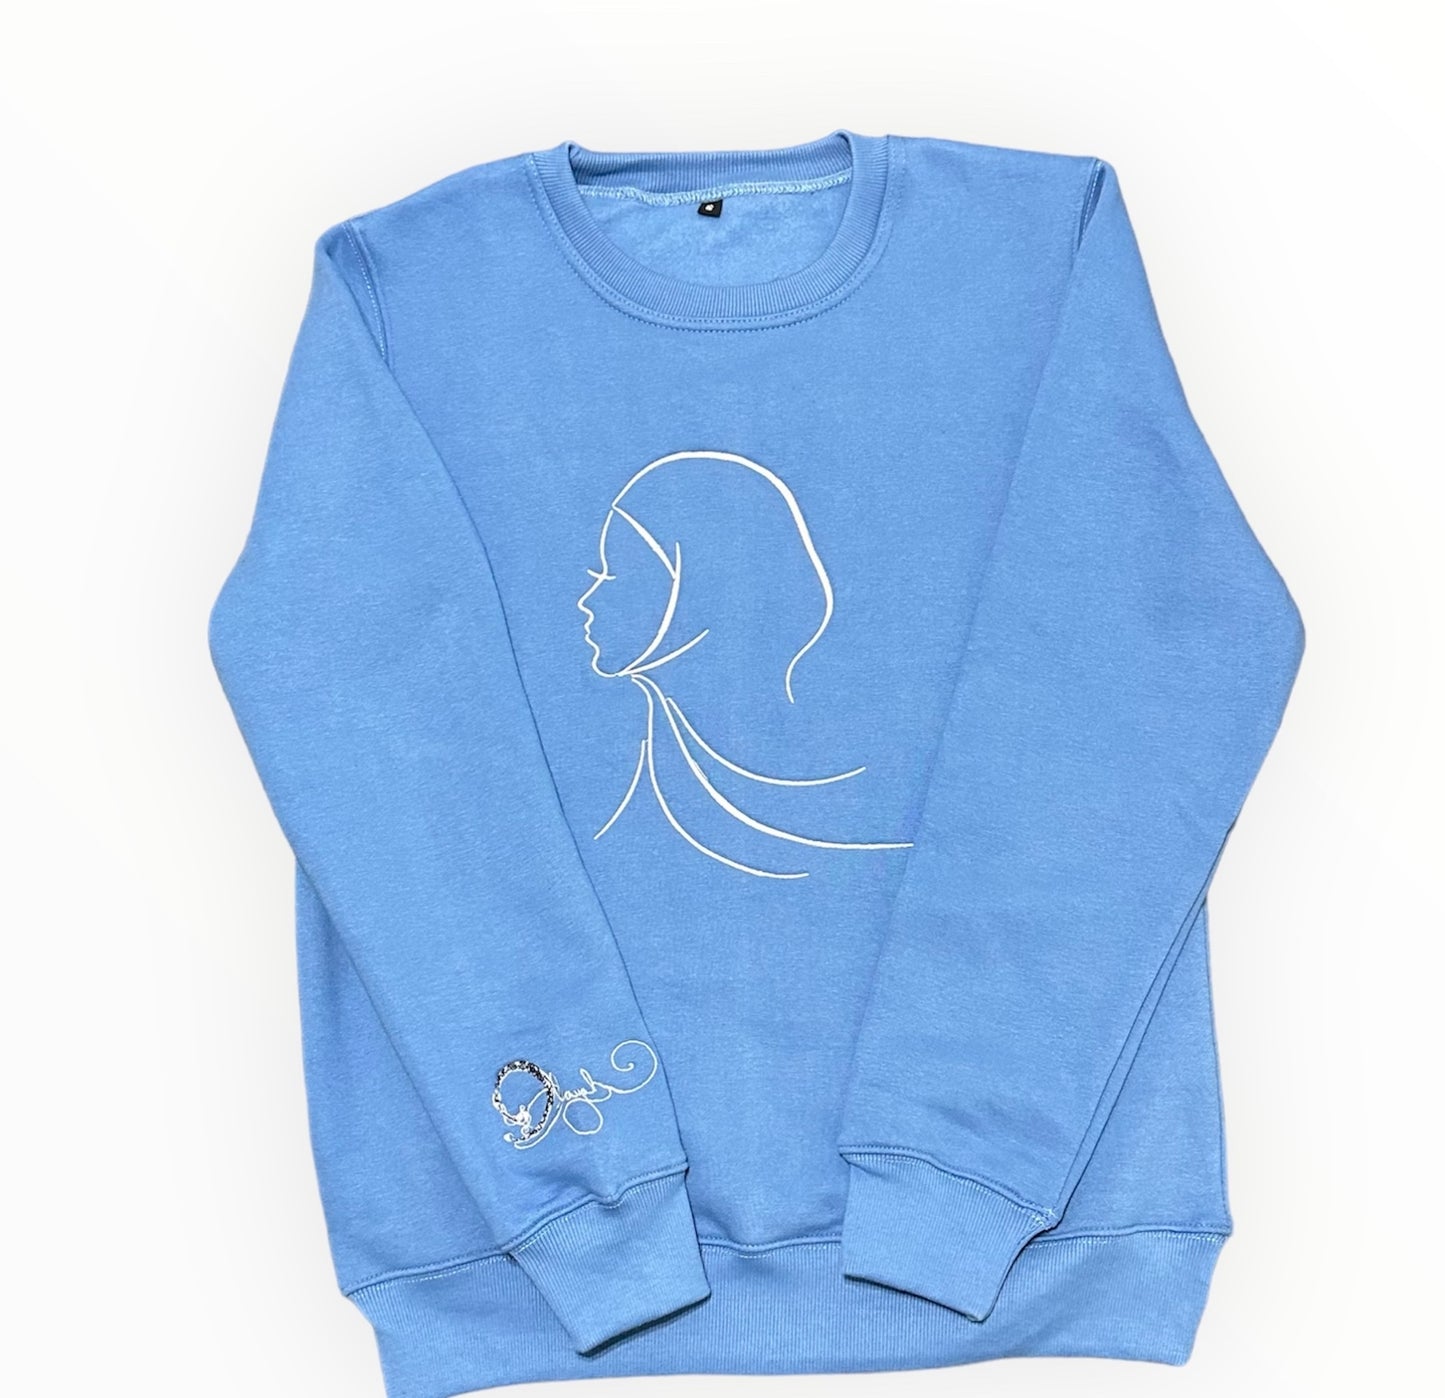 Covered girl Sweater (embroidery kids) - O'layah